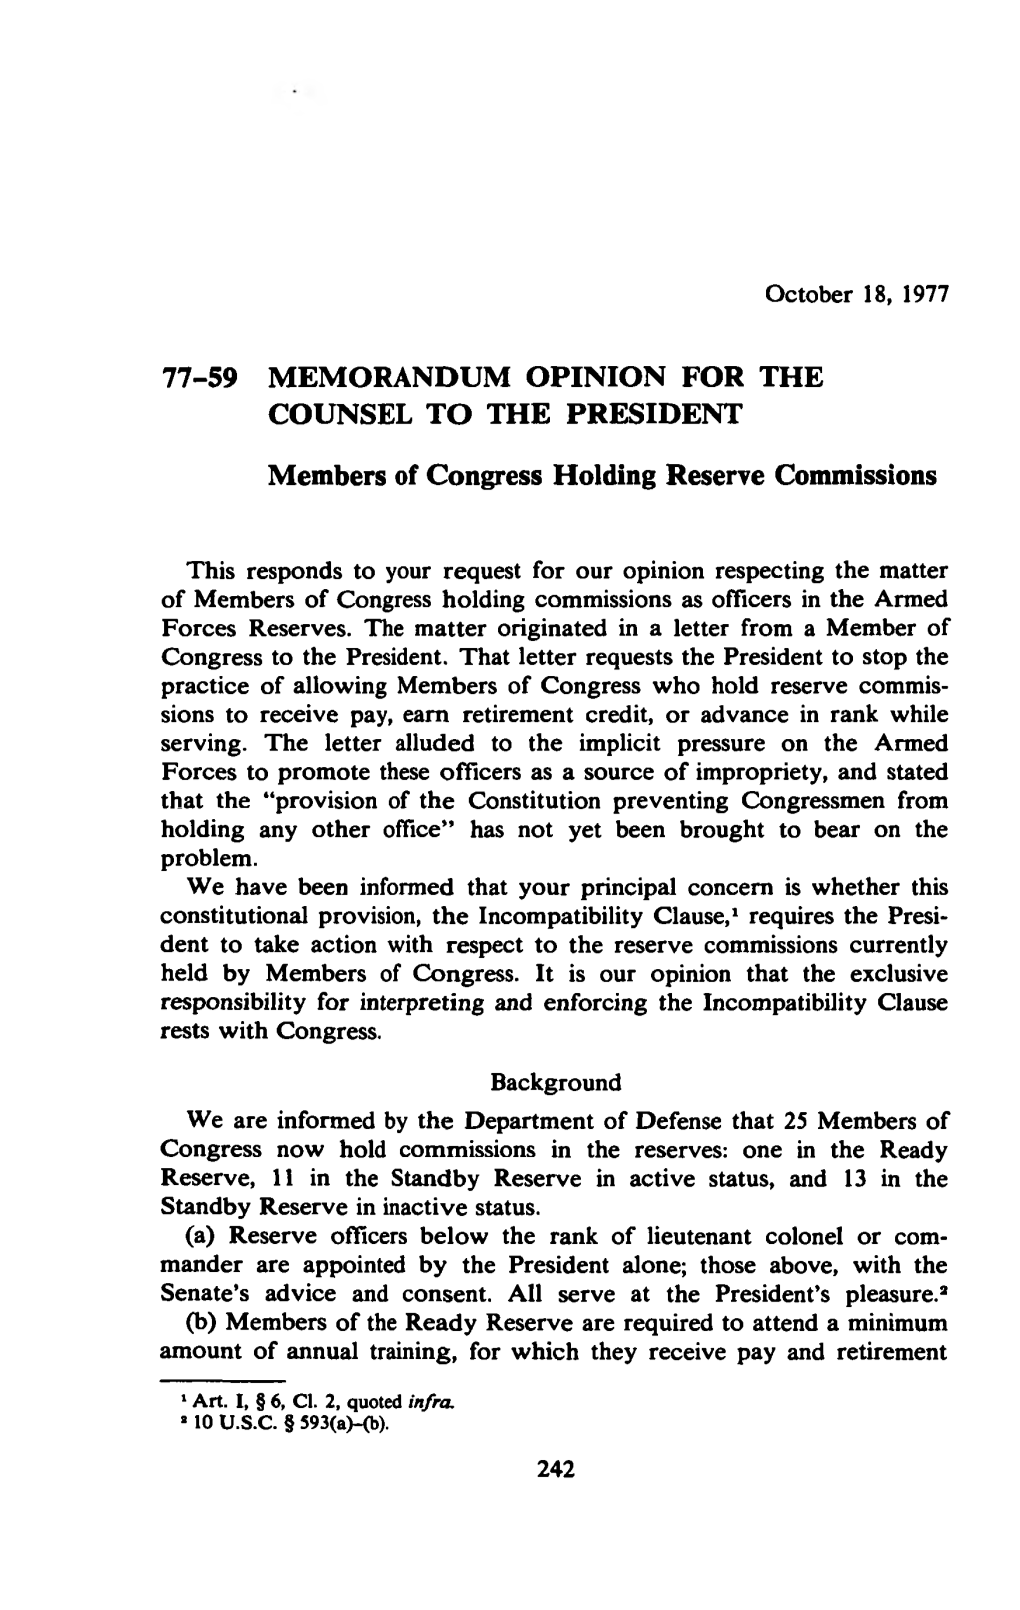 Members of Congress Holding Reserve Commissions 77-59